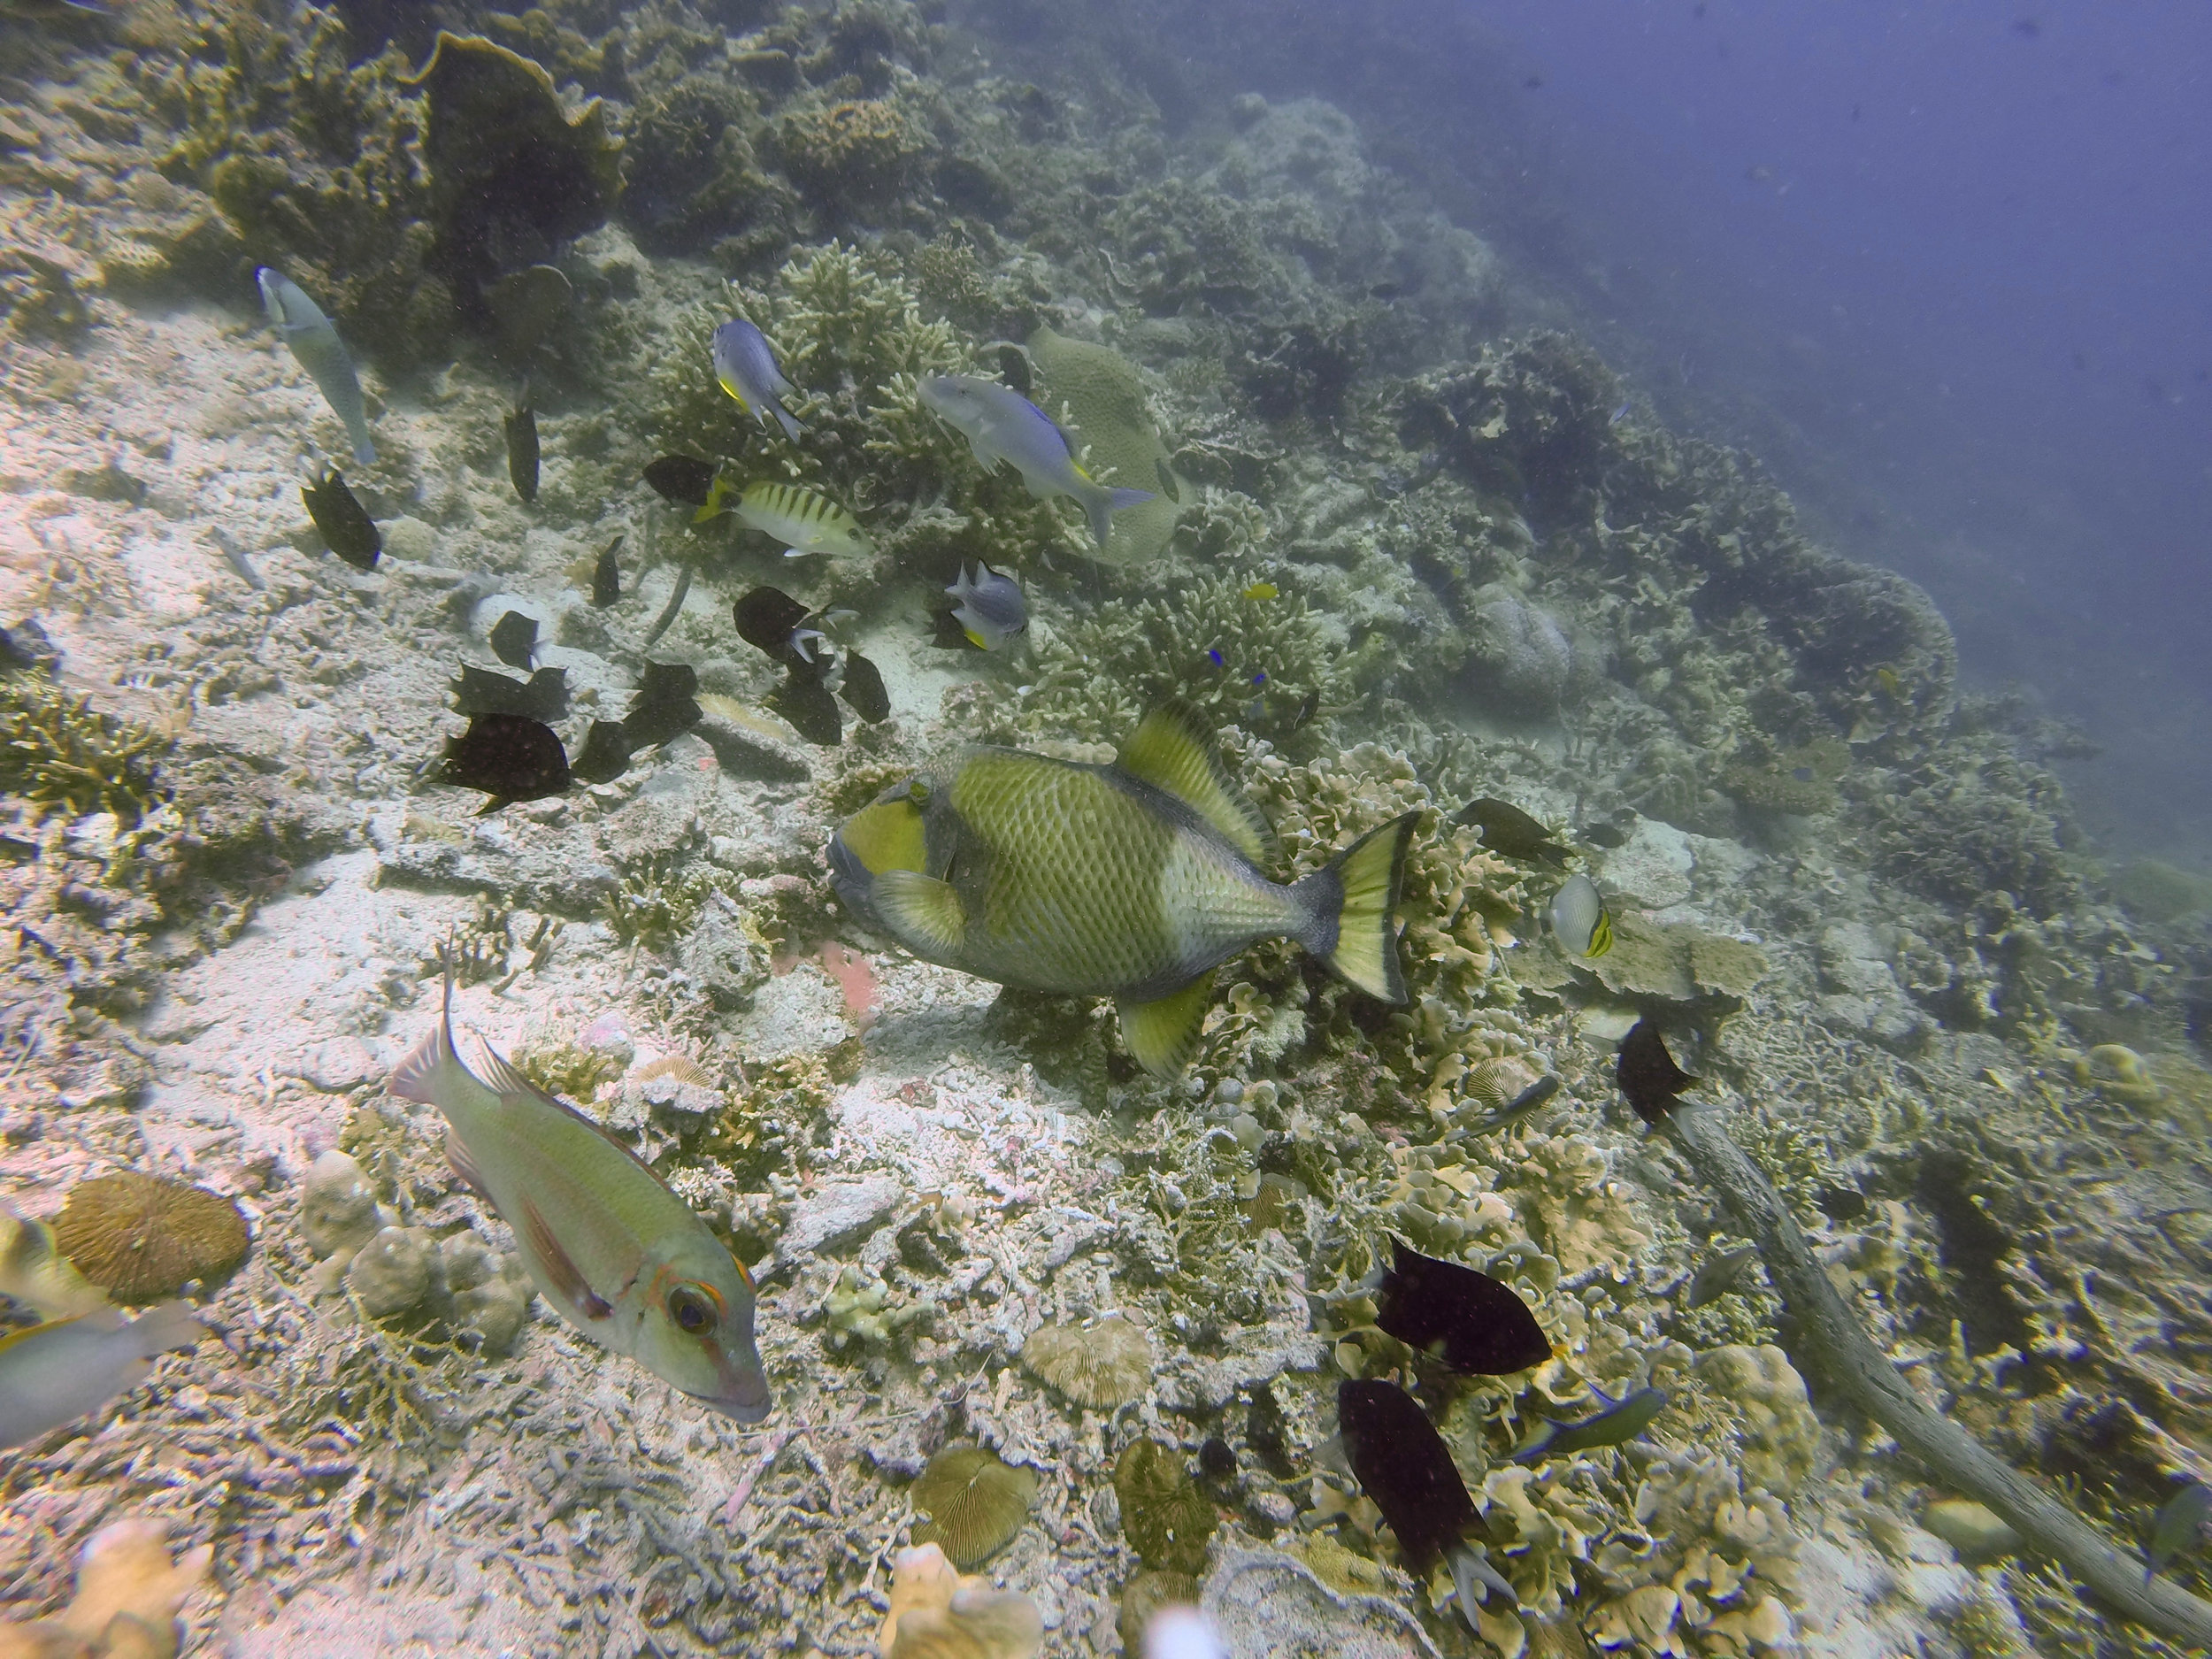  (2/2019, Santa Barbara) Titan triggerfish paper submitted to Marine Biodiversity! Fingers crossed for a timely and fair review. Email me for a sneak-peak. 